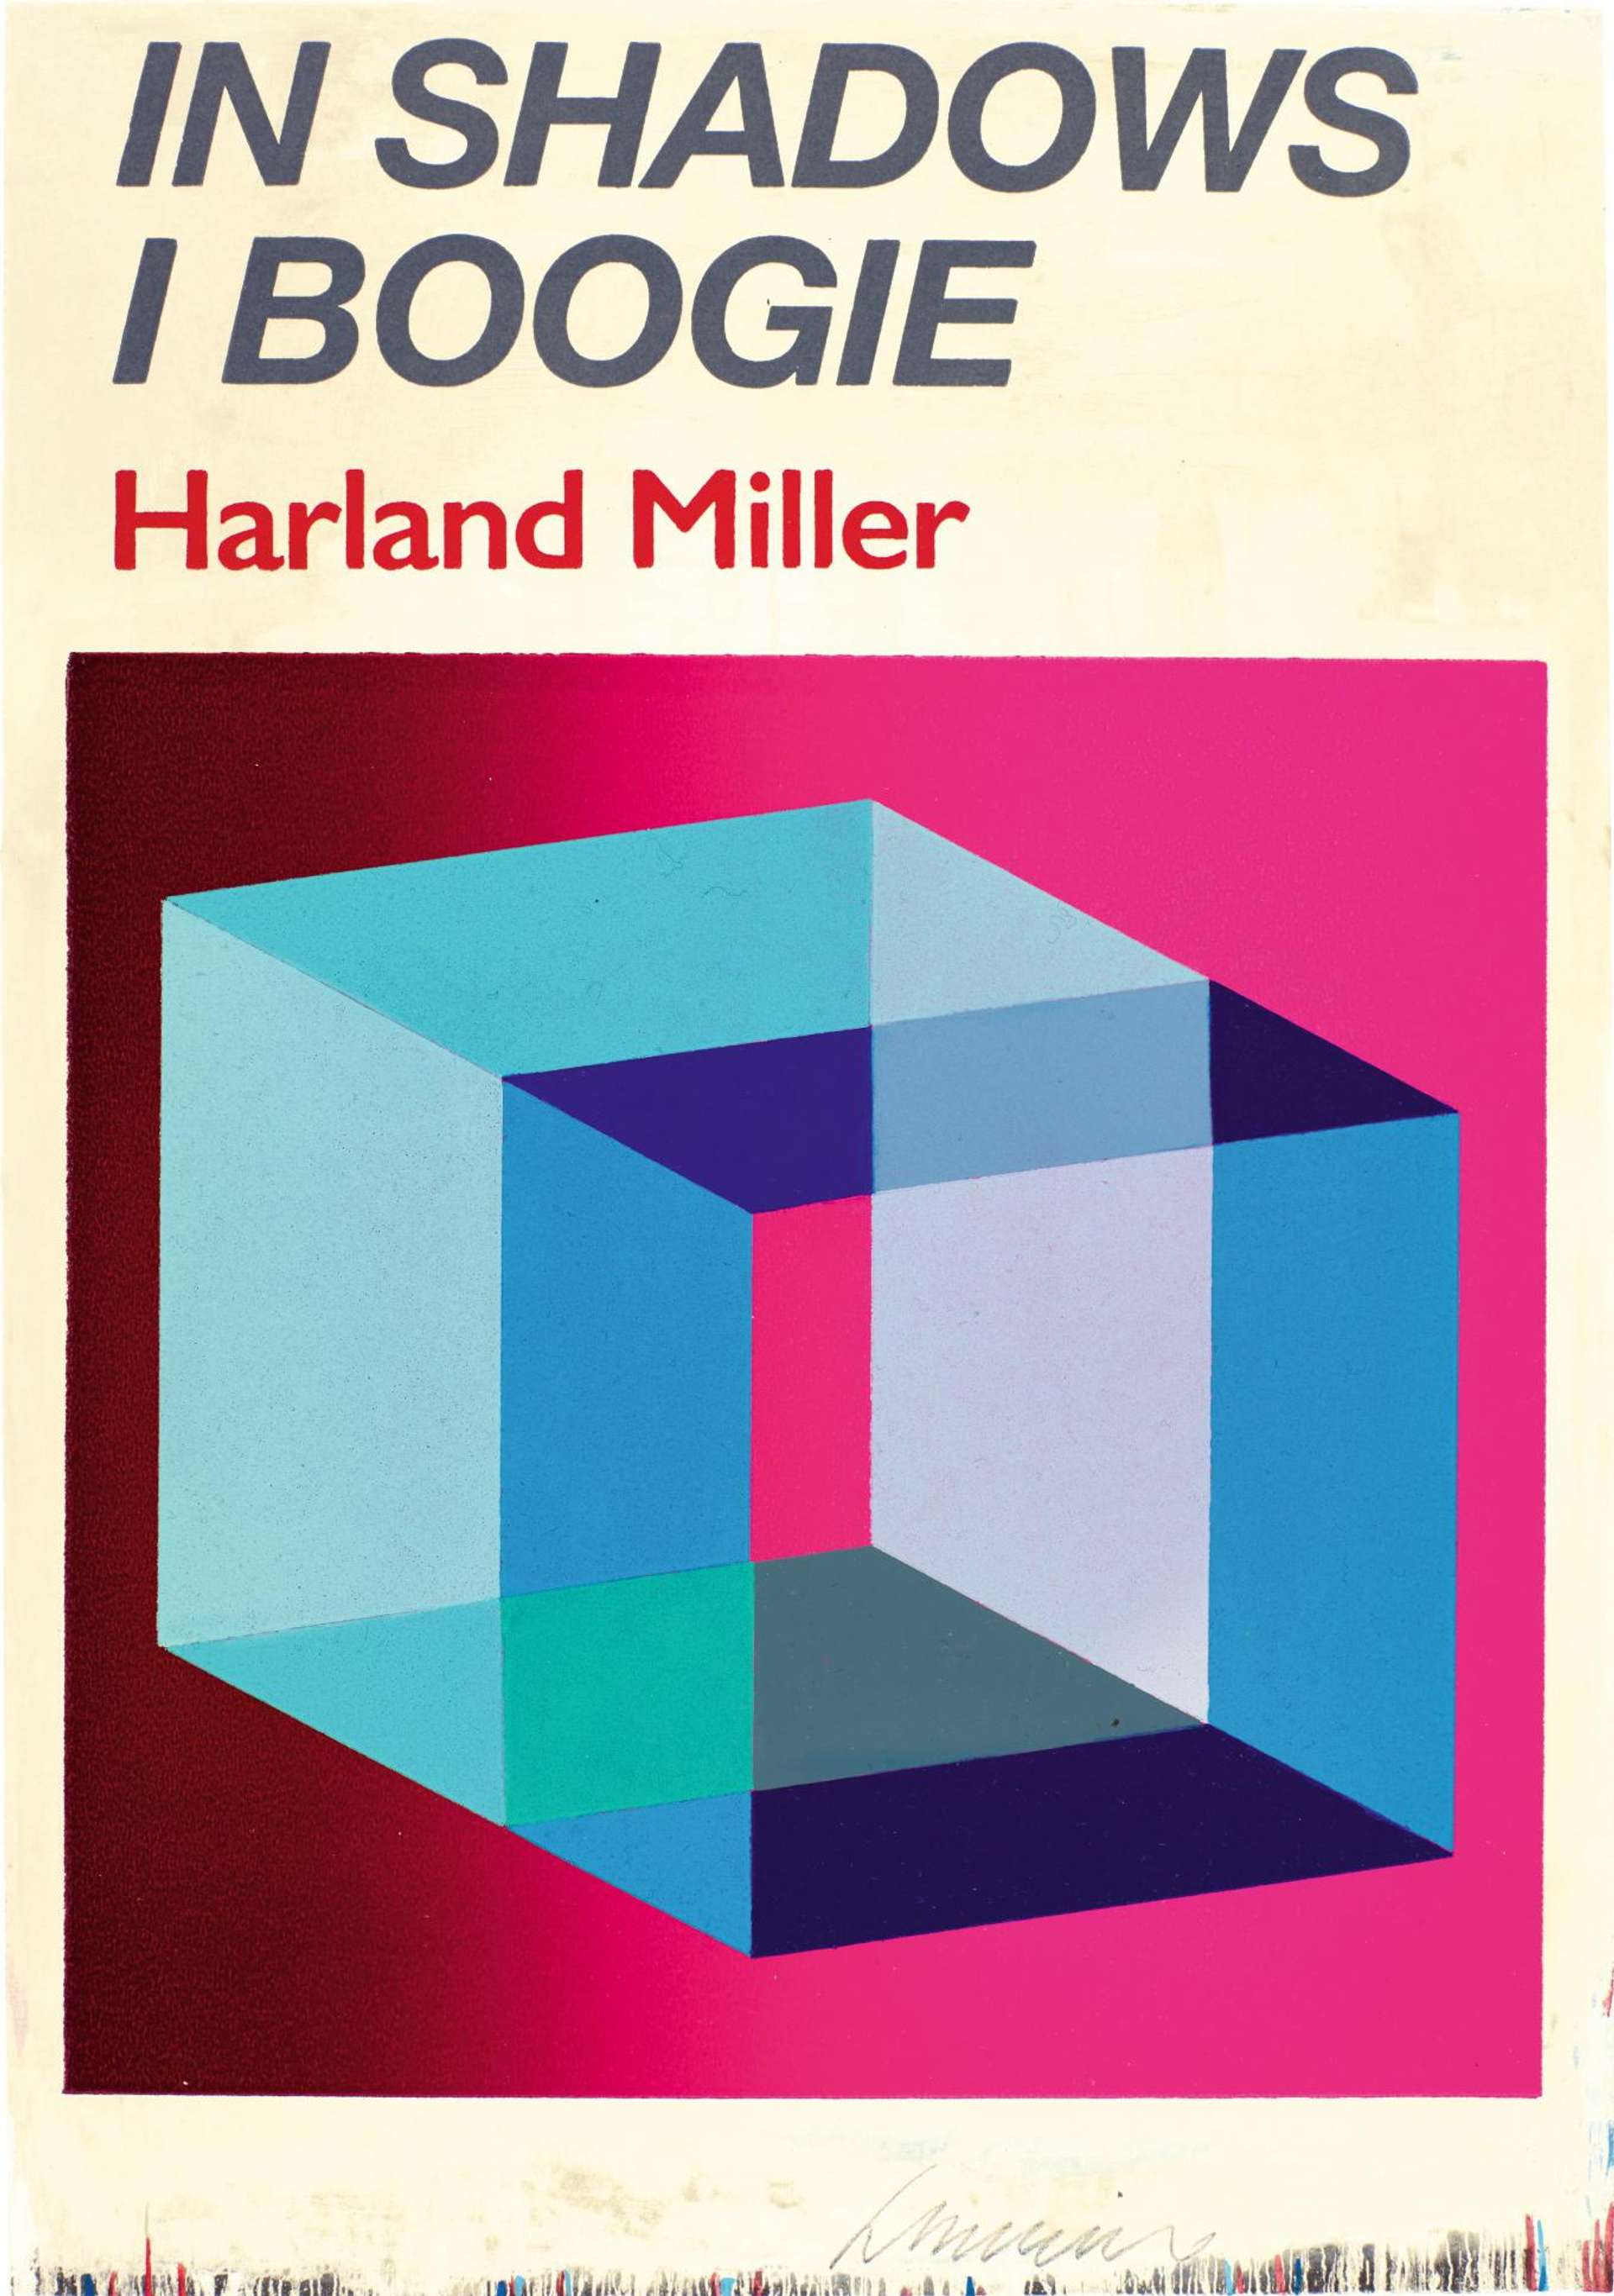 Harland Miller: In Shadows I Boogie (pink) - Signed Print